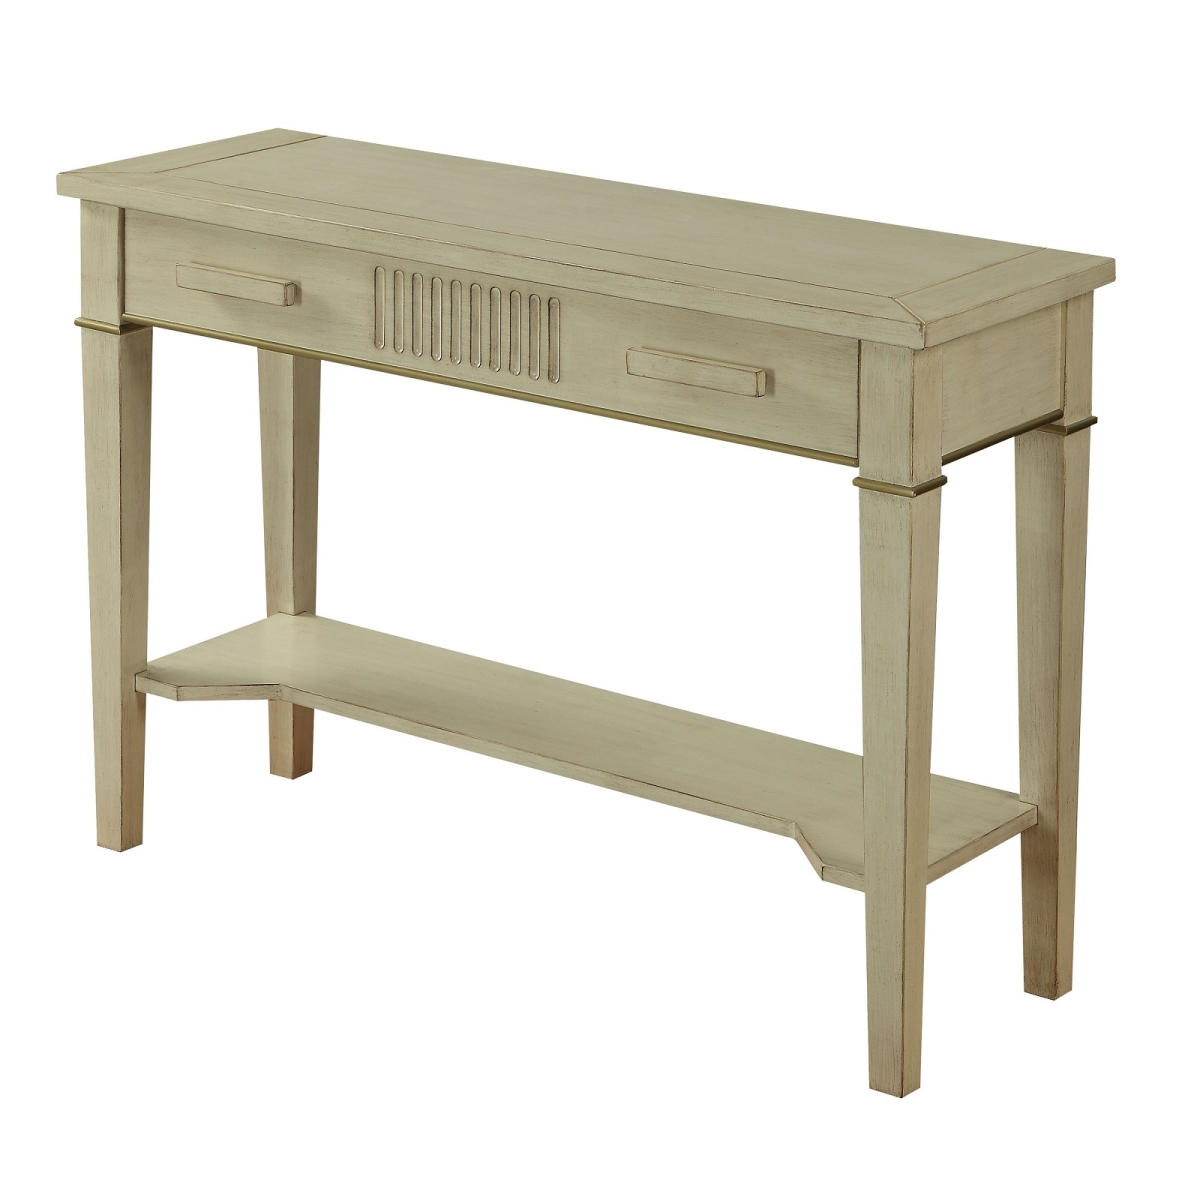 Urban Designs 4767109 Inspiration Console Table, Antique White -30 X 15 X 42 In.